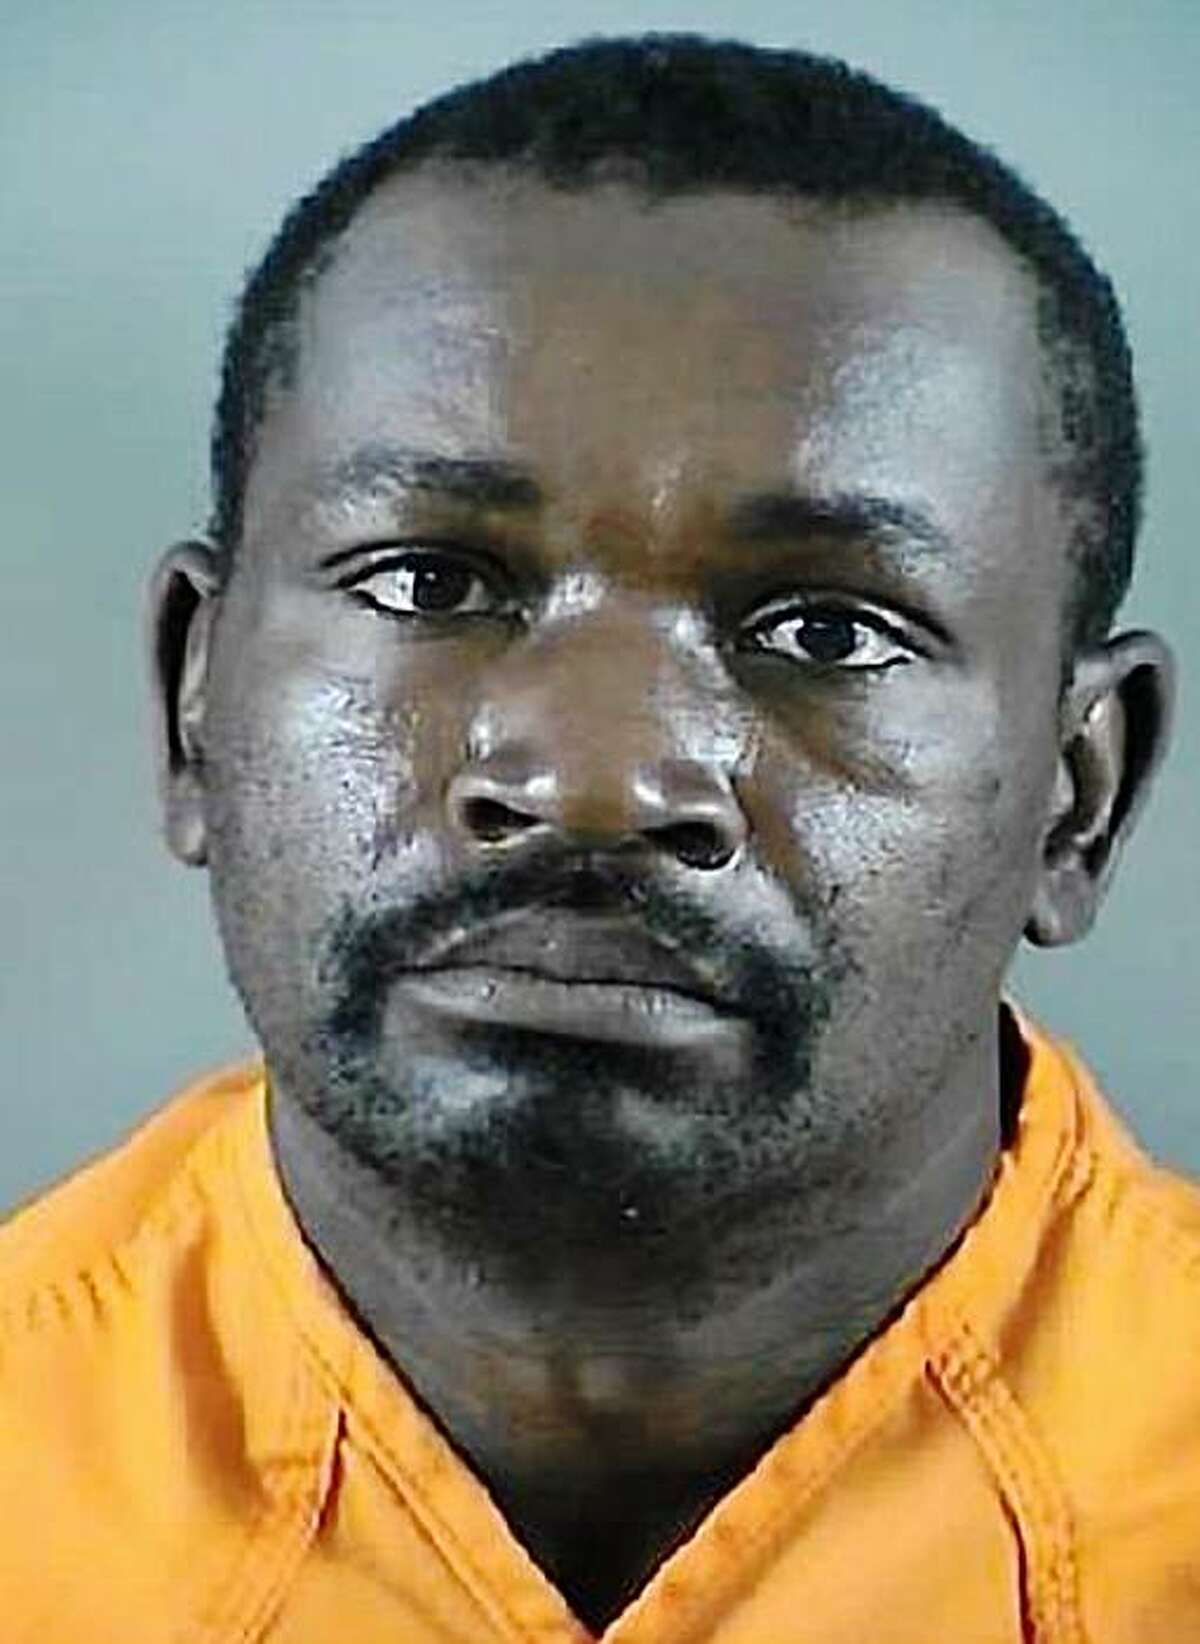 This is a photo provided by Horry County Dentition Center of Rodell Vereen, 50, who was arrested Monday July 27, 2009, and charged with buggery. Police said Vereen was captured on surveillance video having sex with a horse at a stable near his home in Longs, S.C.